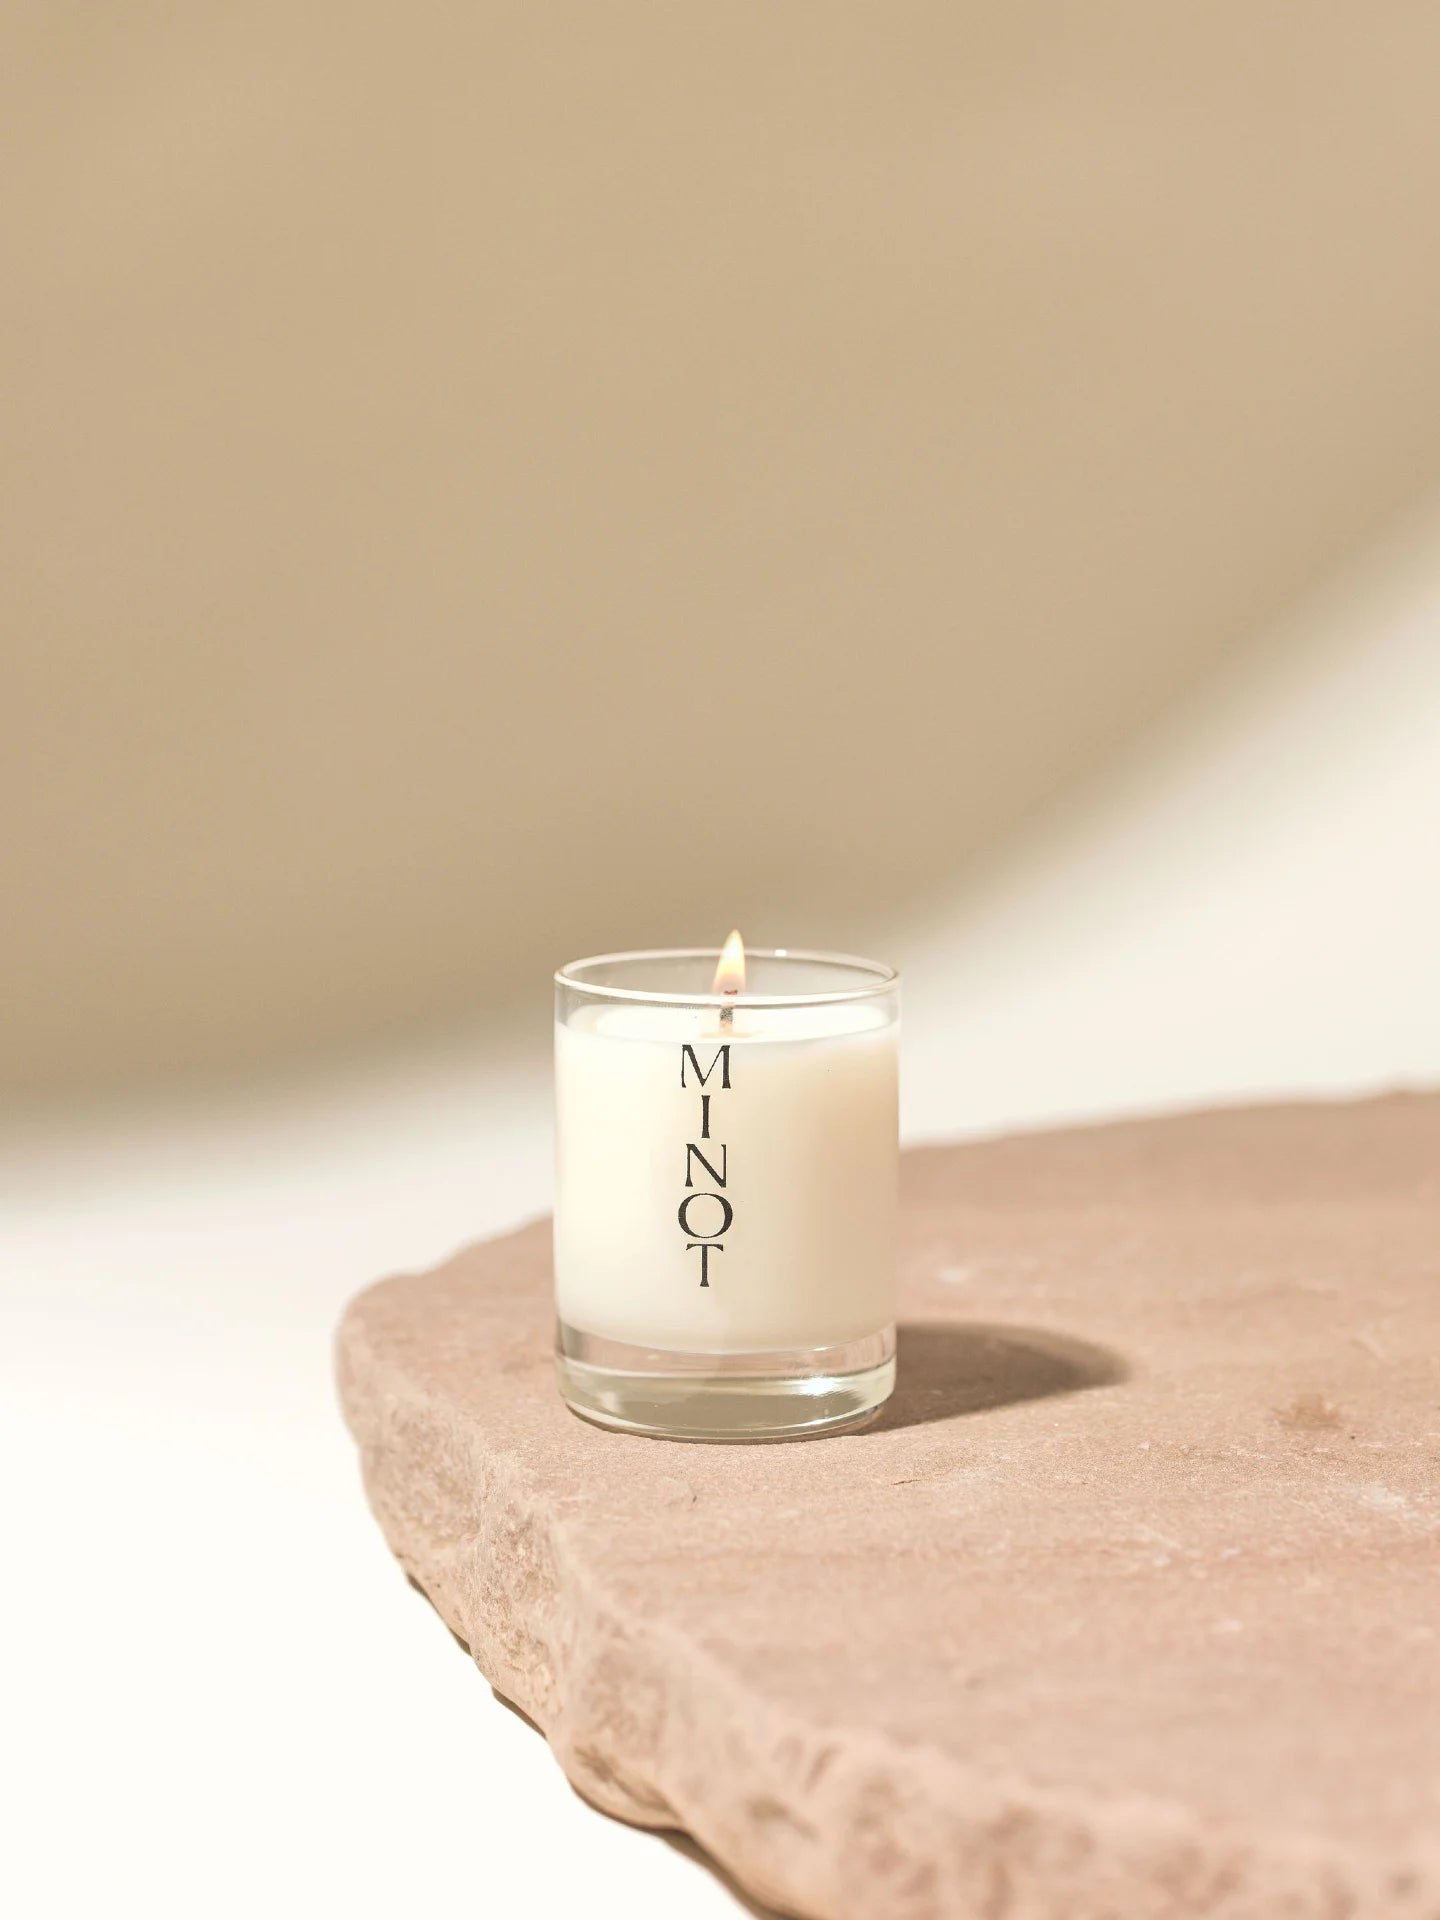 The Cliffwalk Mini is a natural, non-toxic sandalwood patchouli candle that is small for travel